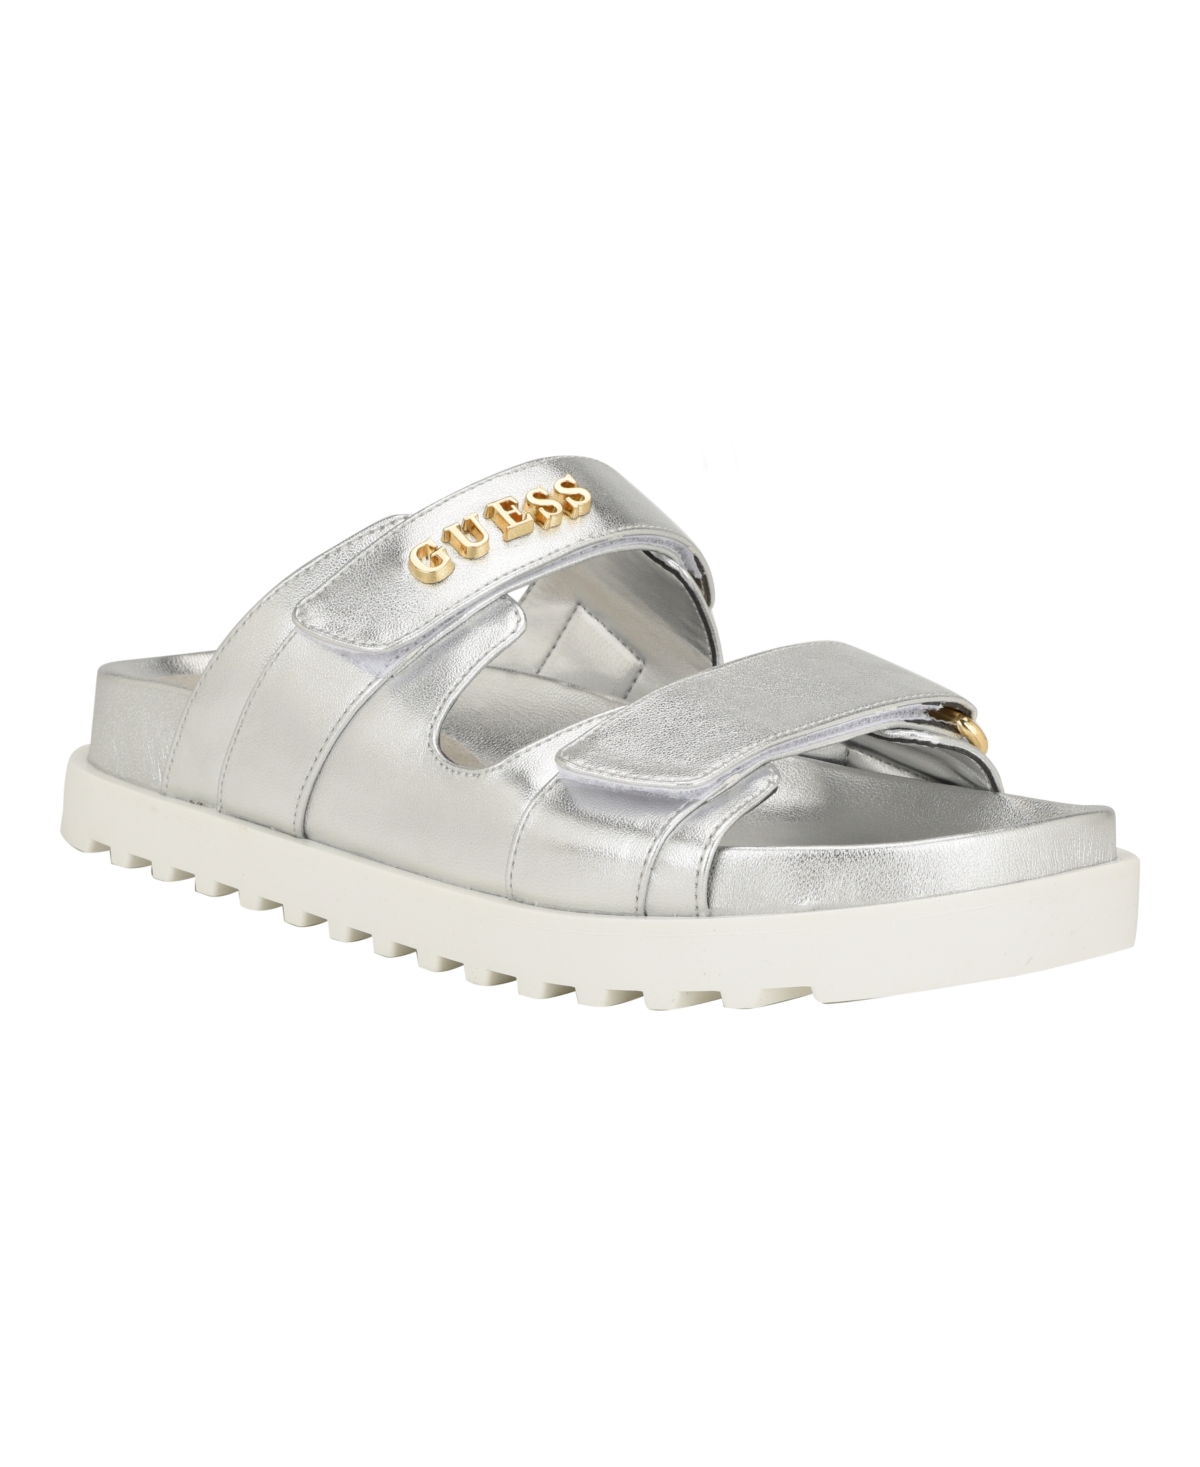 Guess Women's Fabulon Two Strap Fabric Slide-on Sandals In Silver - Manmade